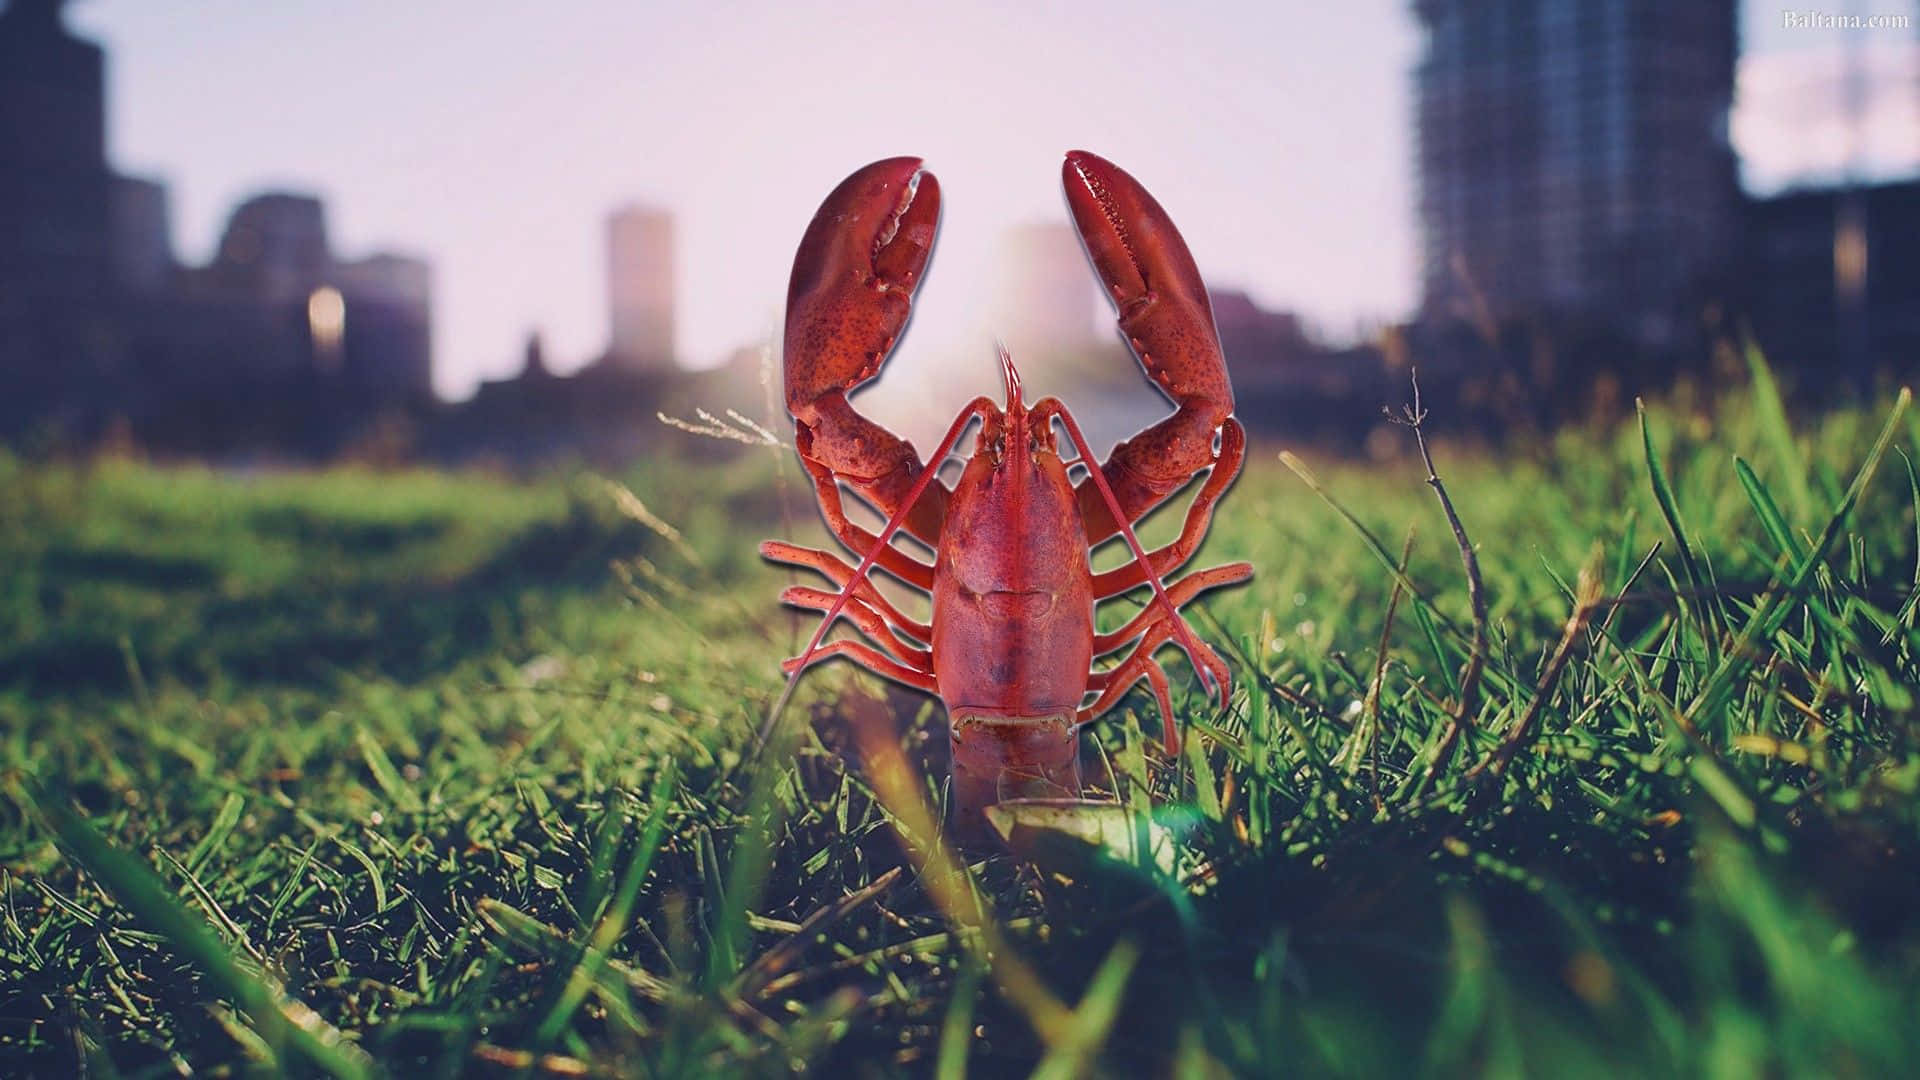 Take a closer look at the beautiful details of lobster